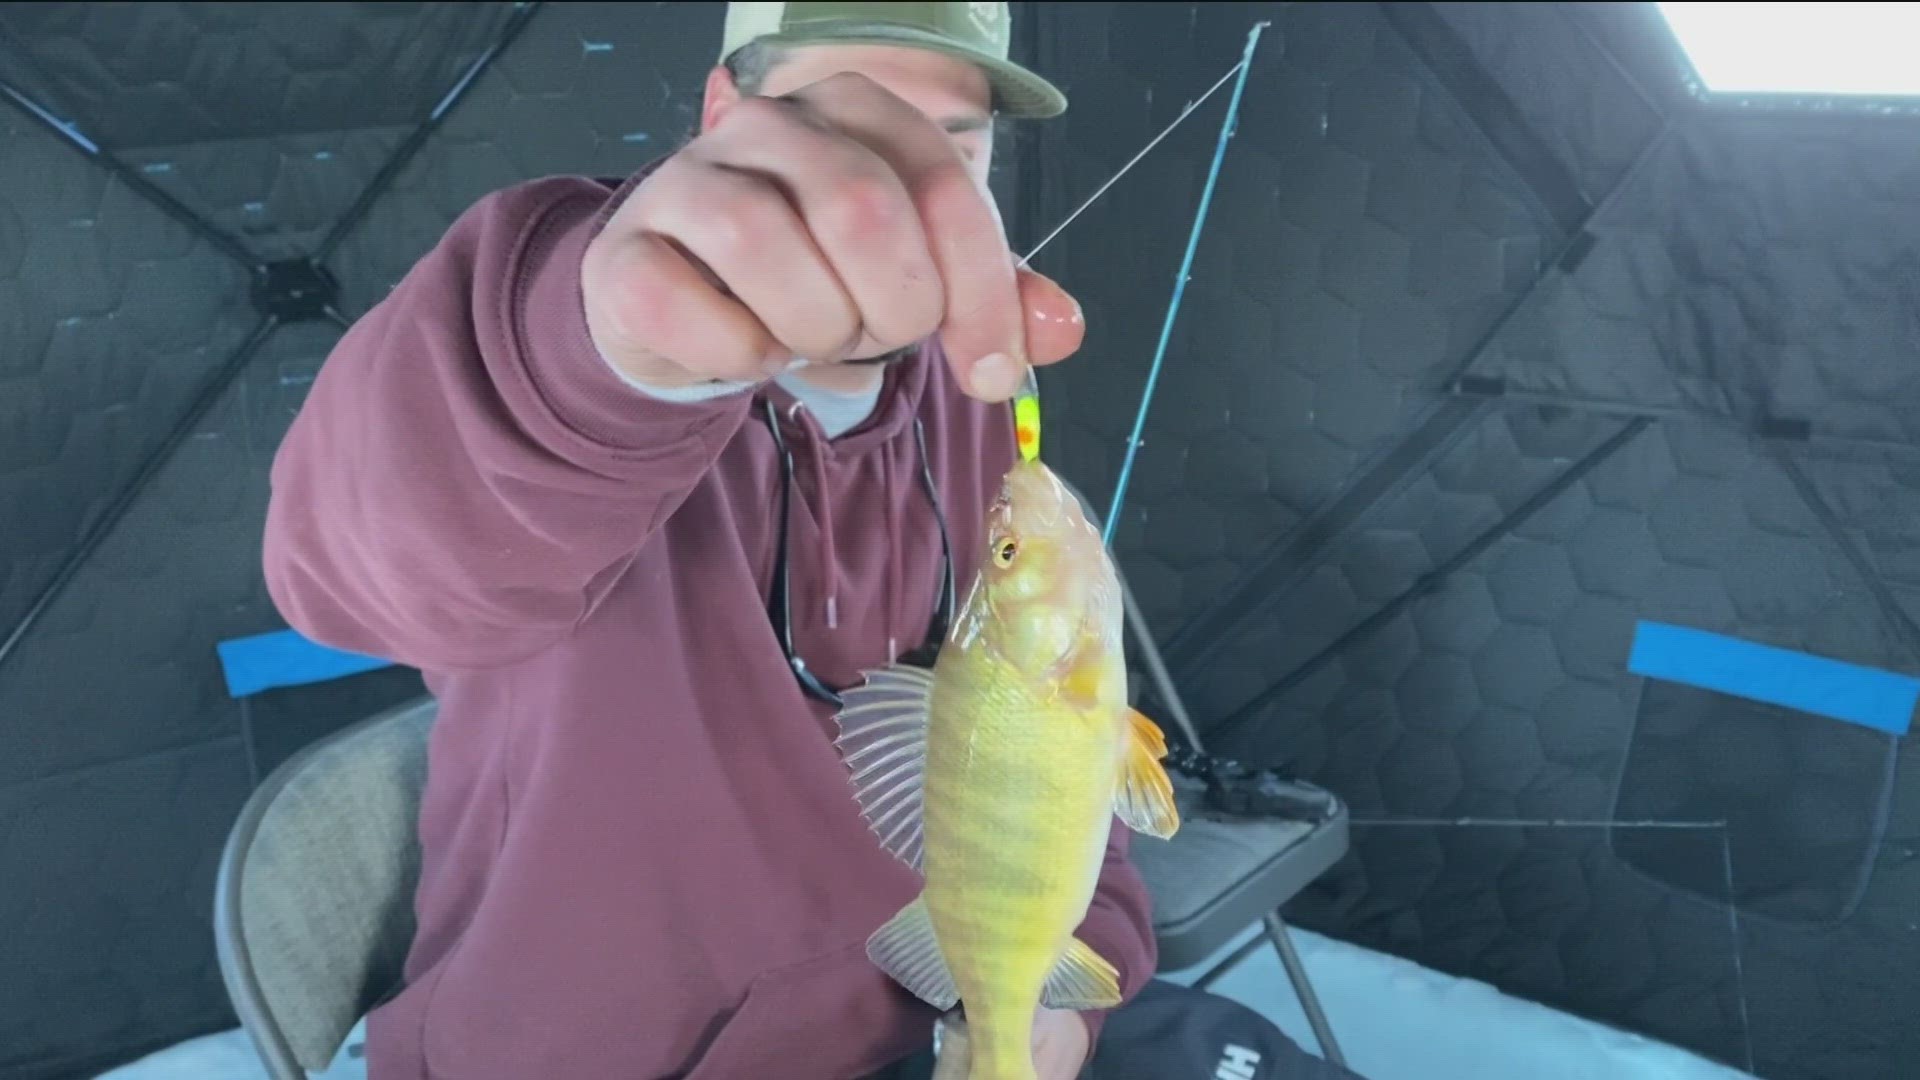 We bring you a look into the wondrous world of Idaho ice fishing and why the Gem State is a top destination for not only seasoned anglers, but all adventurers alike.